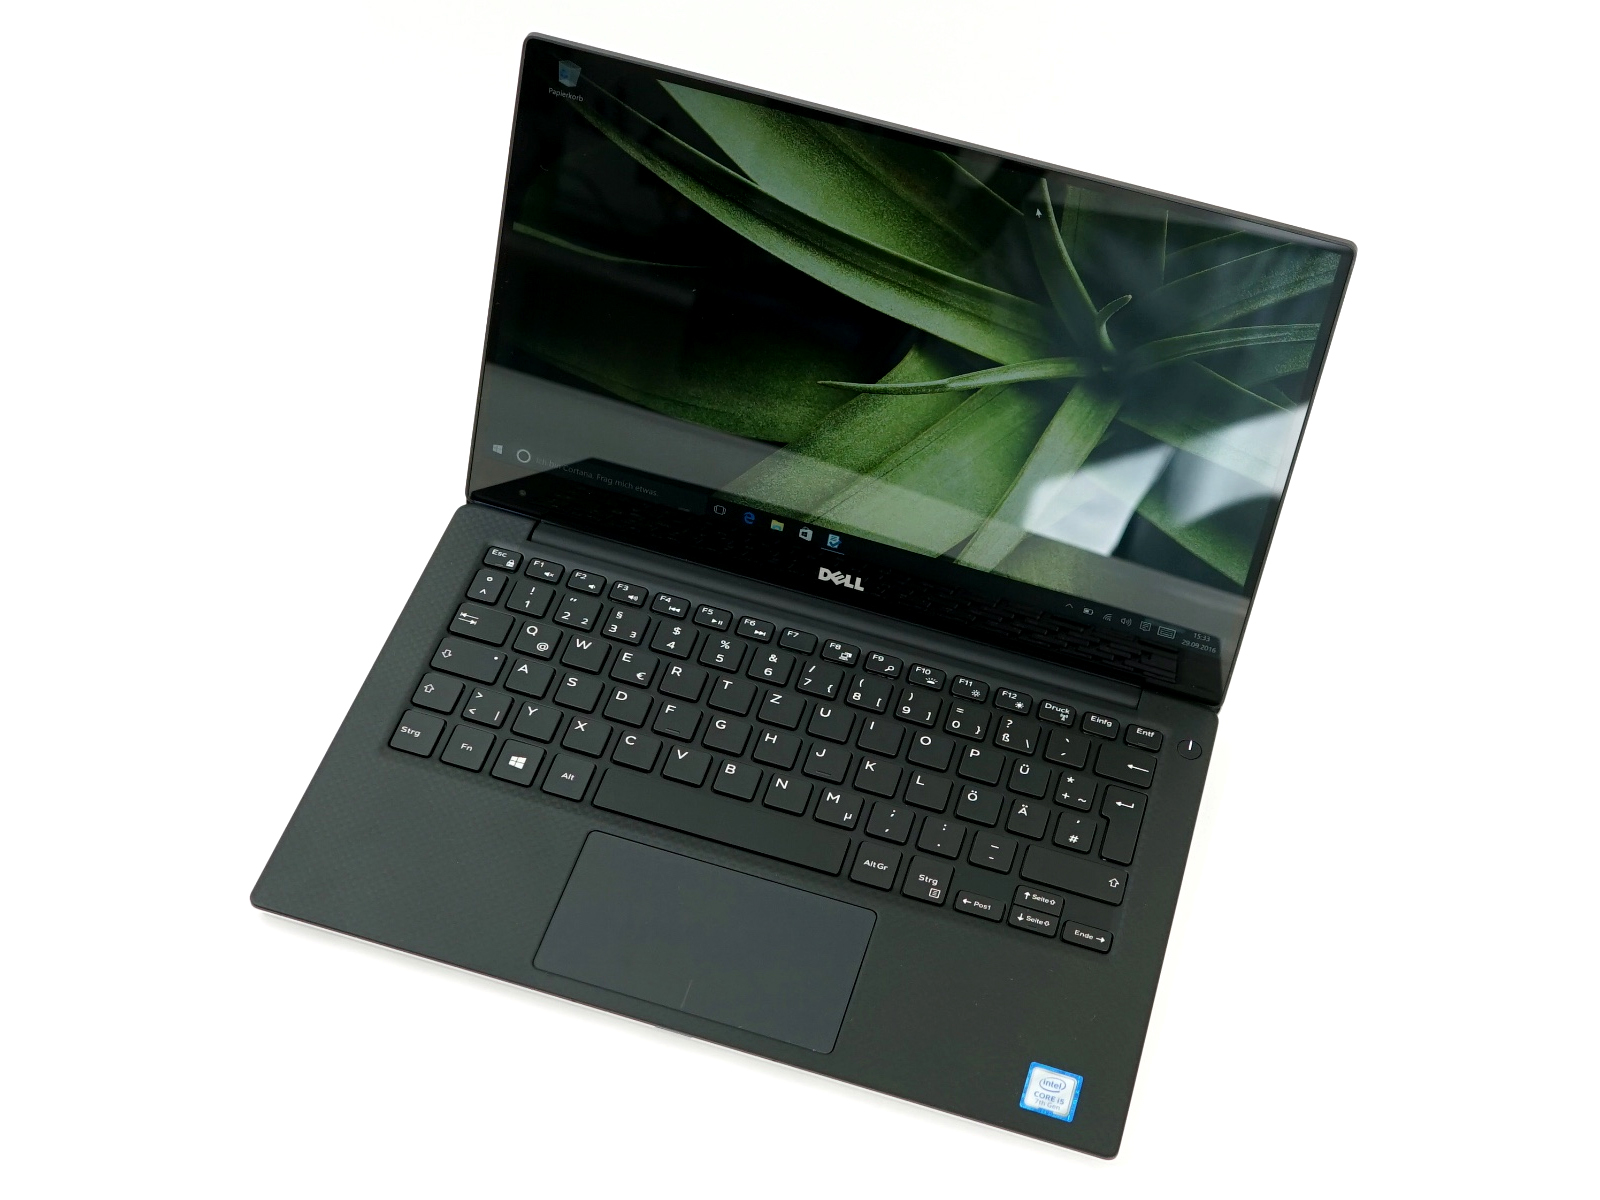 Dell XPS 13 9360 (FHD, i7, Iris) Laptop Review - NotebookCheck.net 